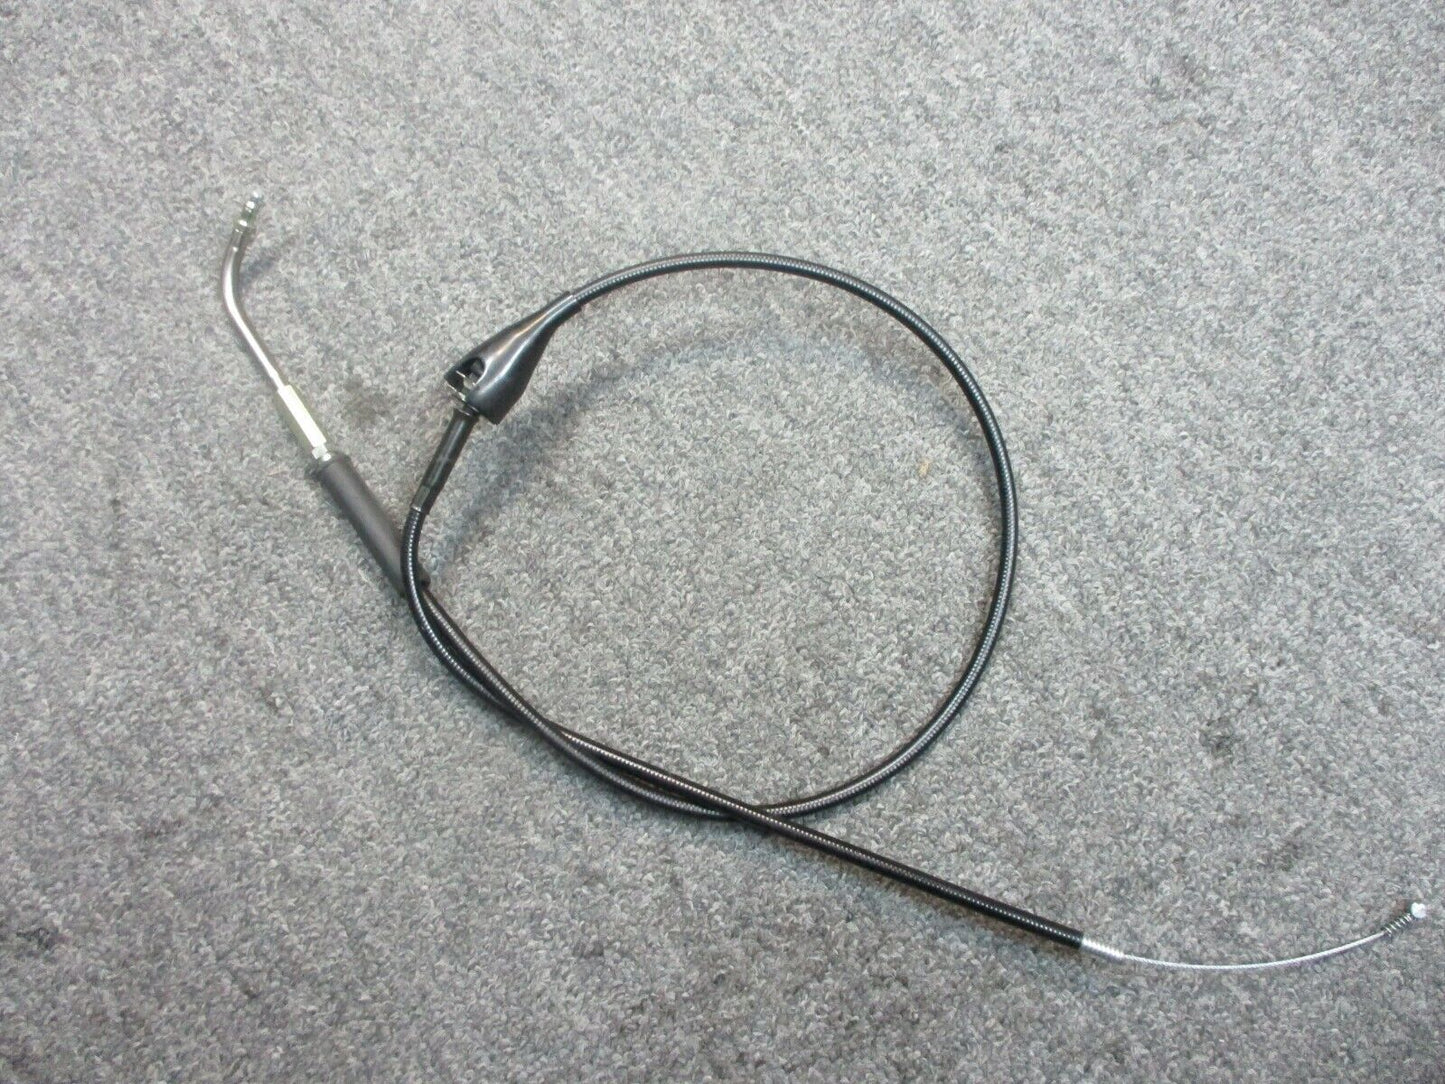 Harley Davidson OEM Stock Idle Control Cable Assembly 56237-99A 06-07